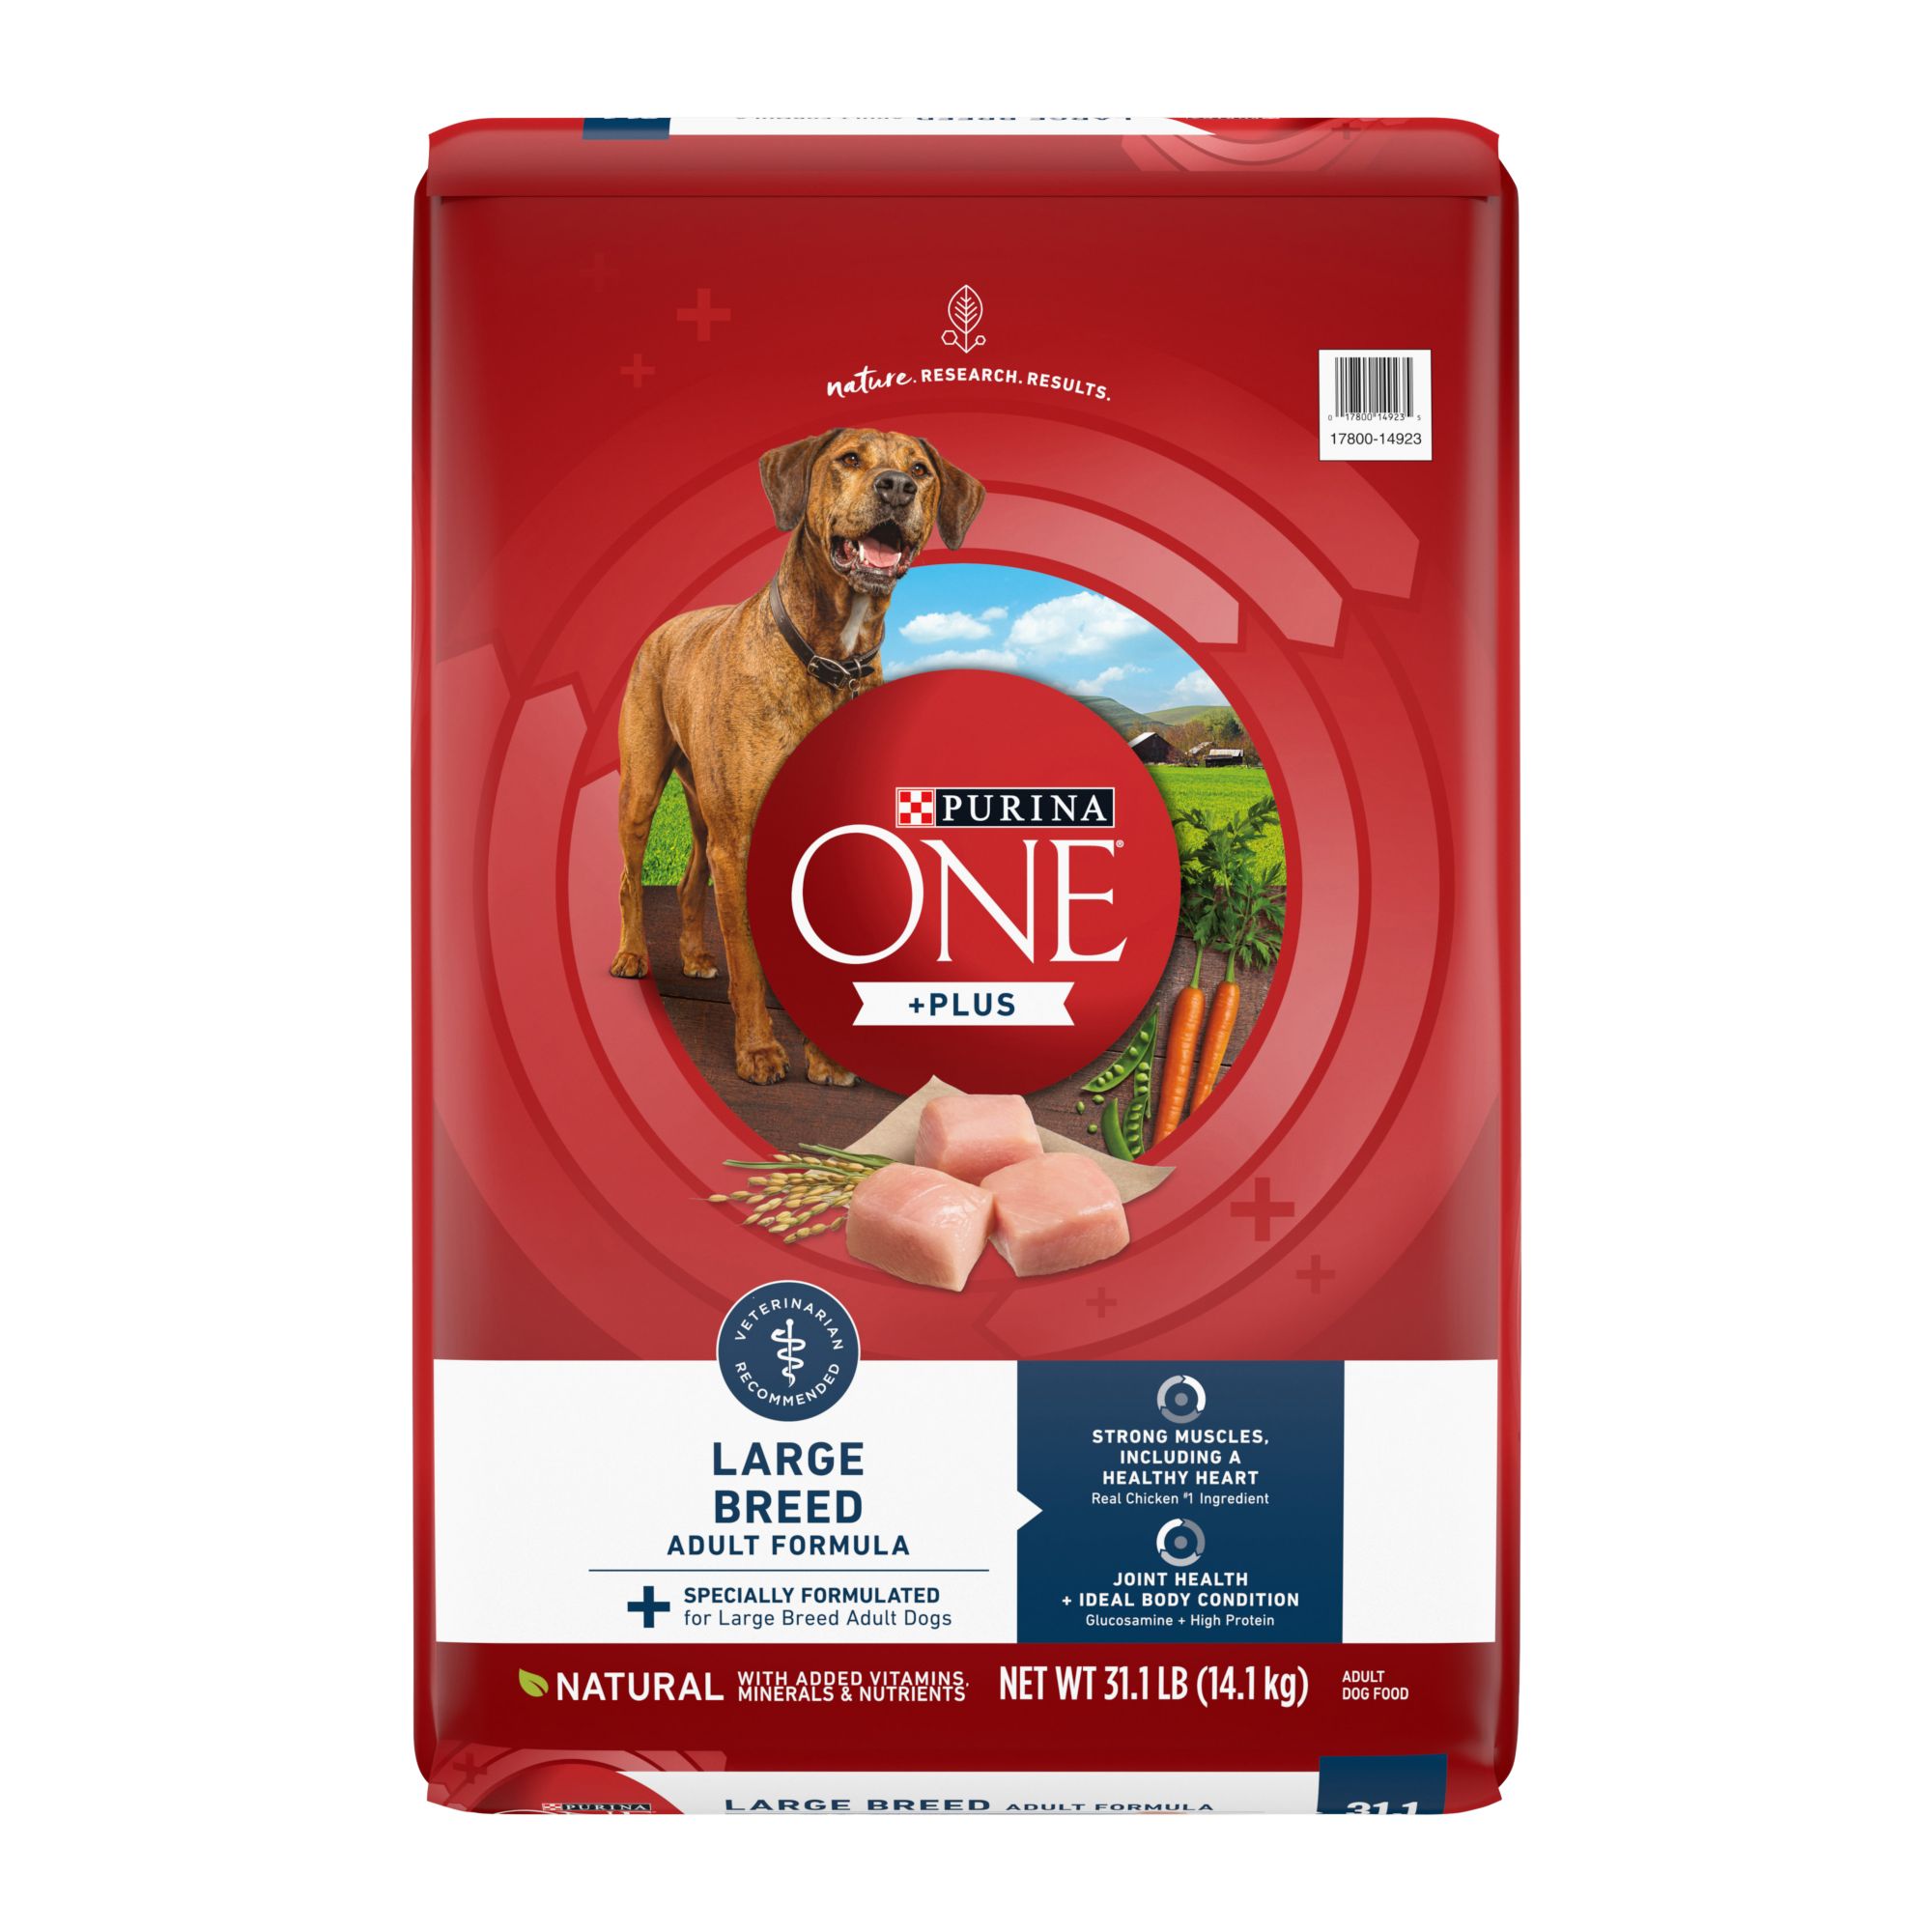 Purina ONE +Plus Natural Large Breed Formula Adult Dry Dog Food, 31.1 lbs.